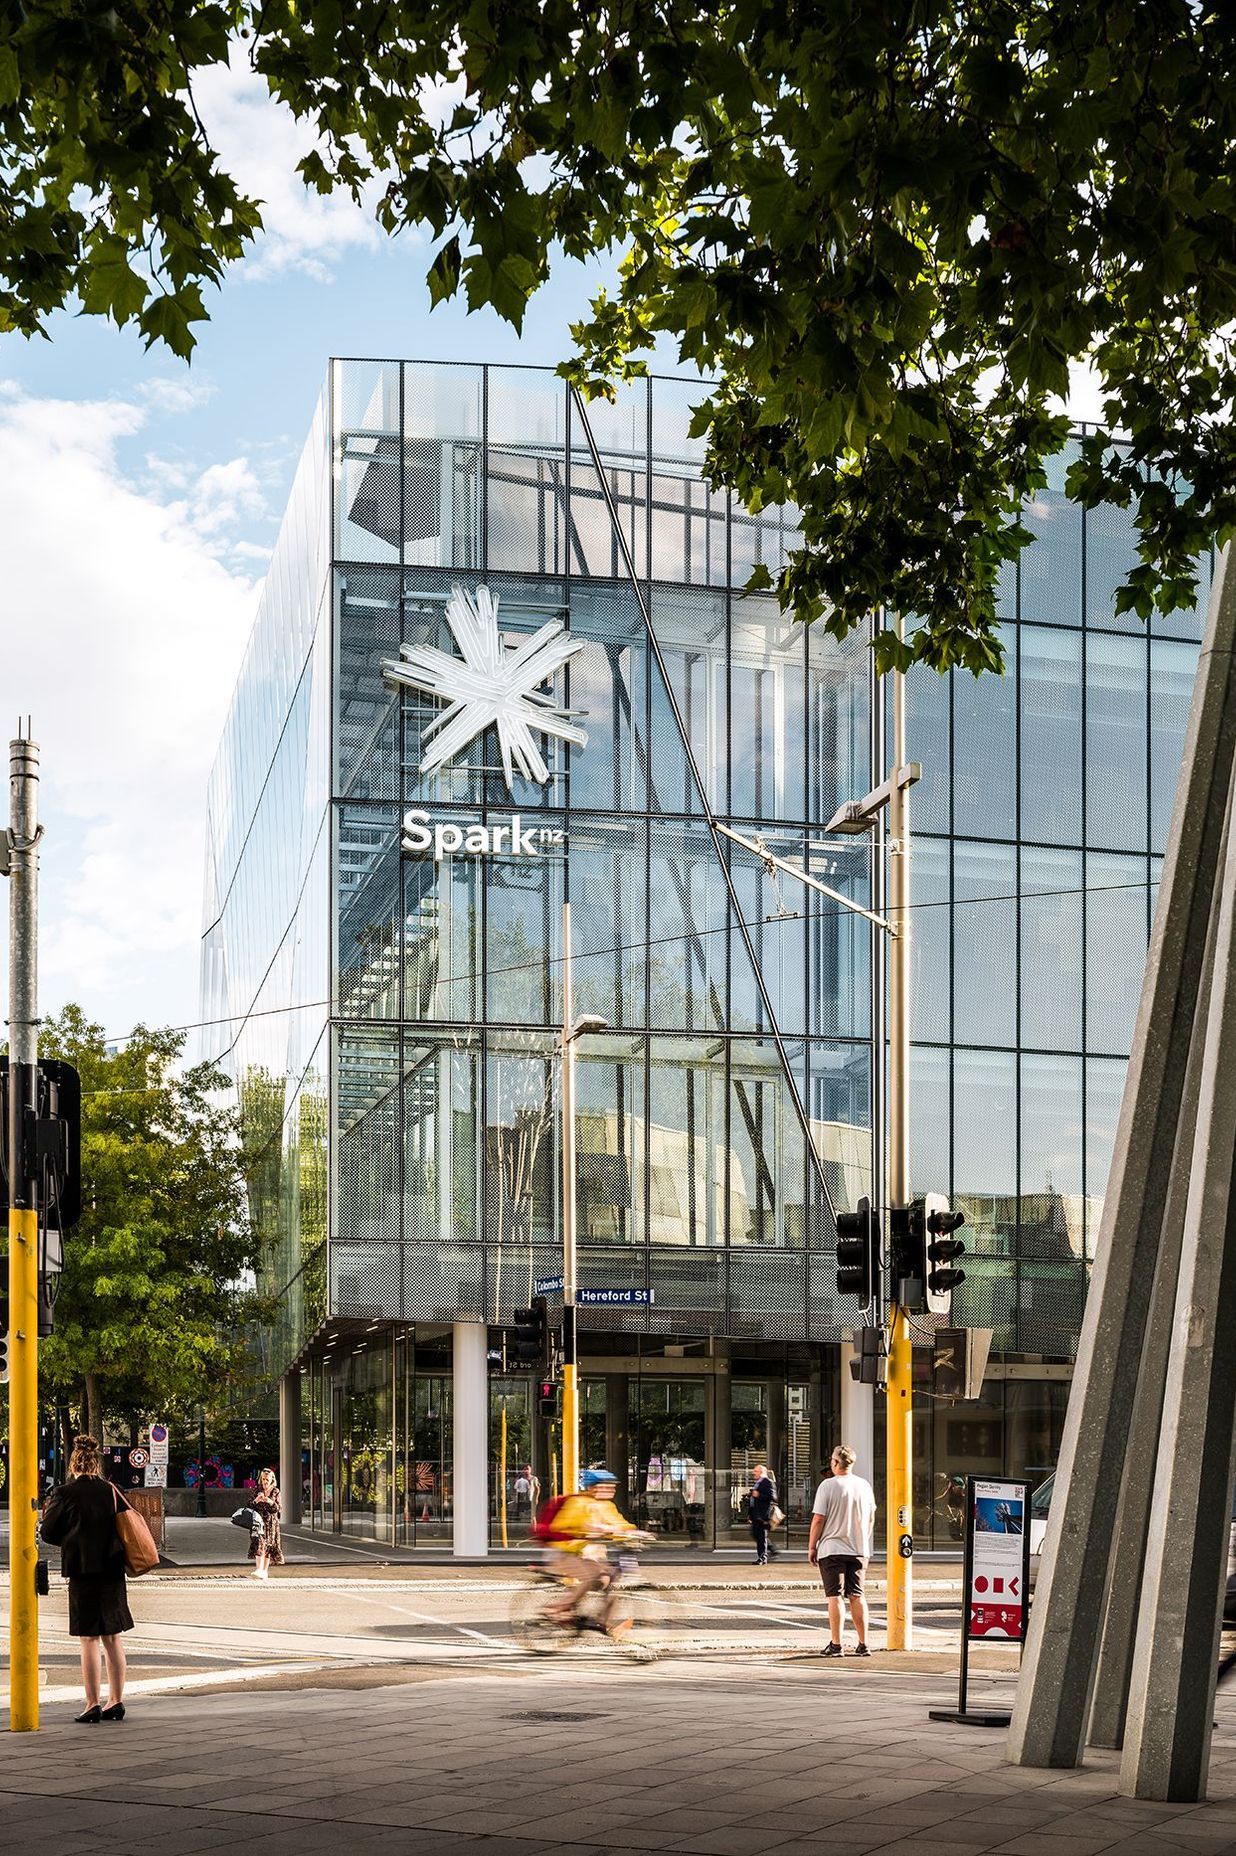 The building includes 10,000m² of commercial offices, retail and hospitality spaces, including headquarters for 500 of Spark NZ's Christchurch-based staff.